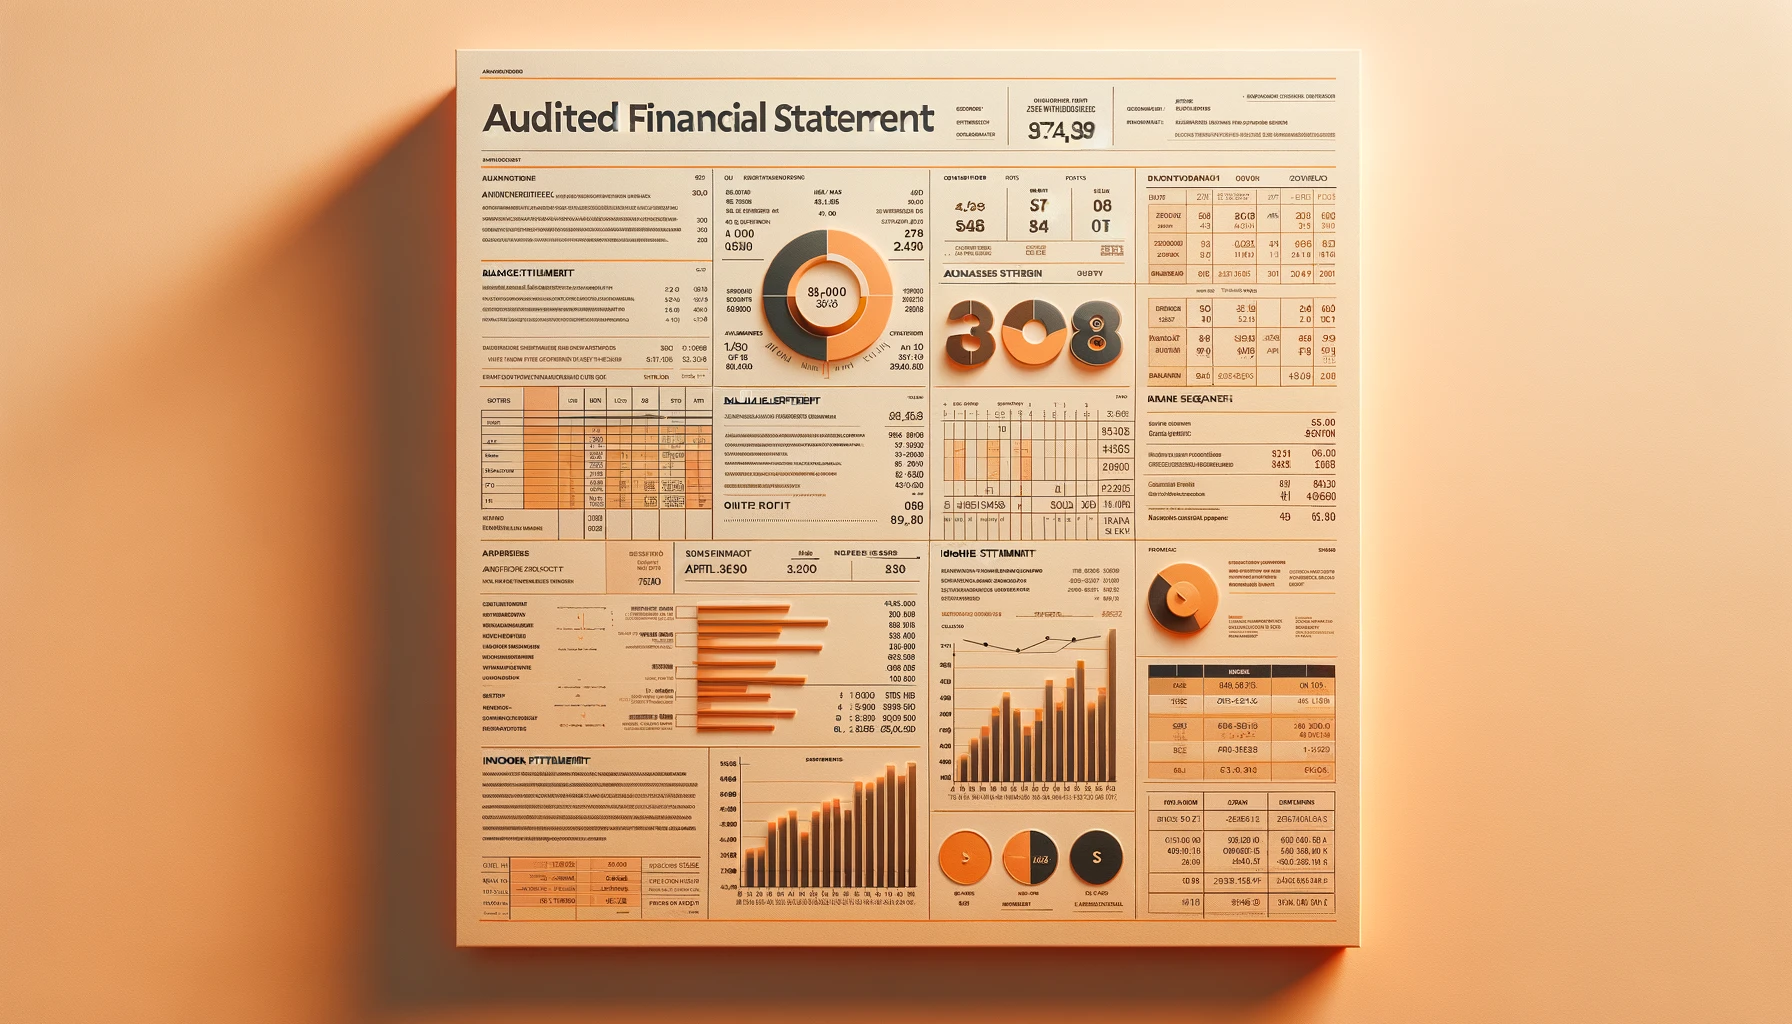 Image About  Why Every Business Needs an Audited Financial Statement